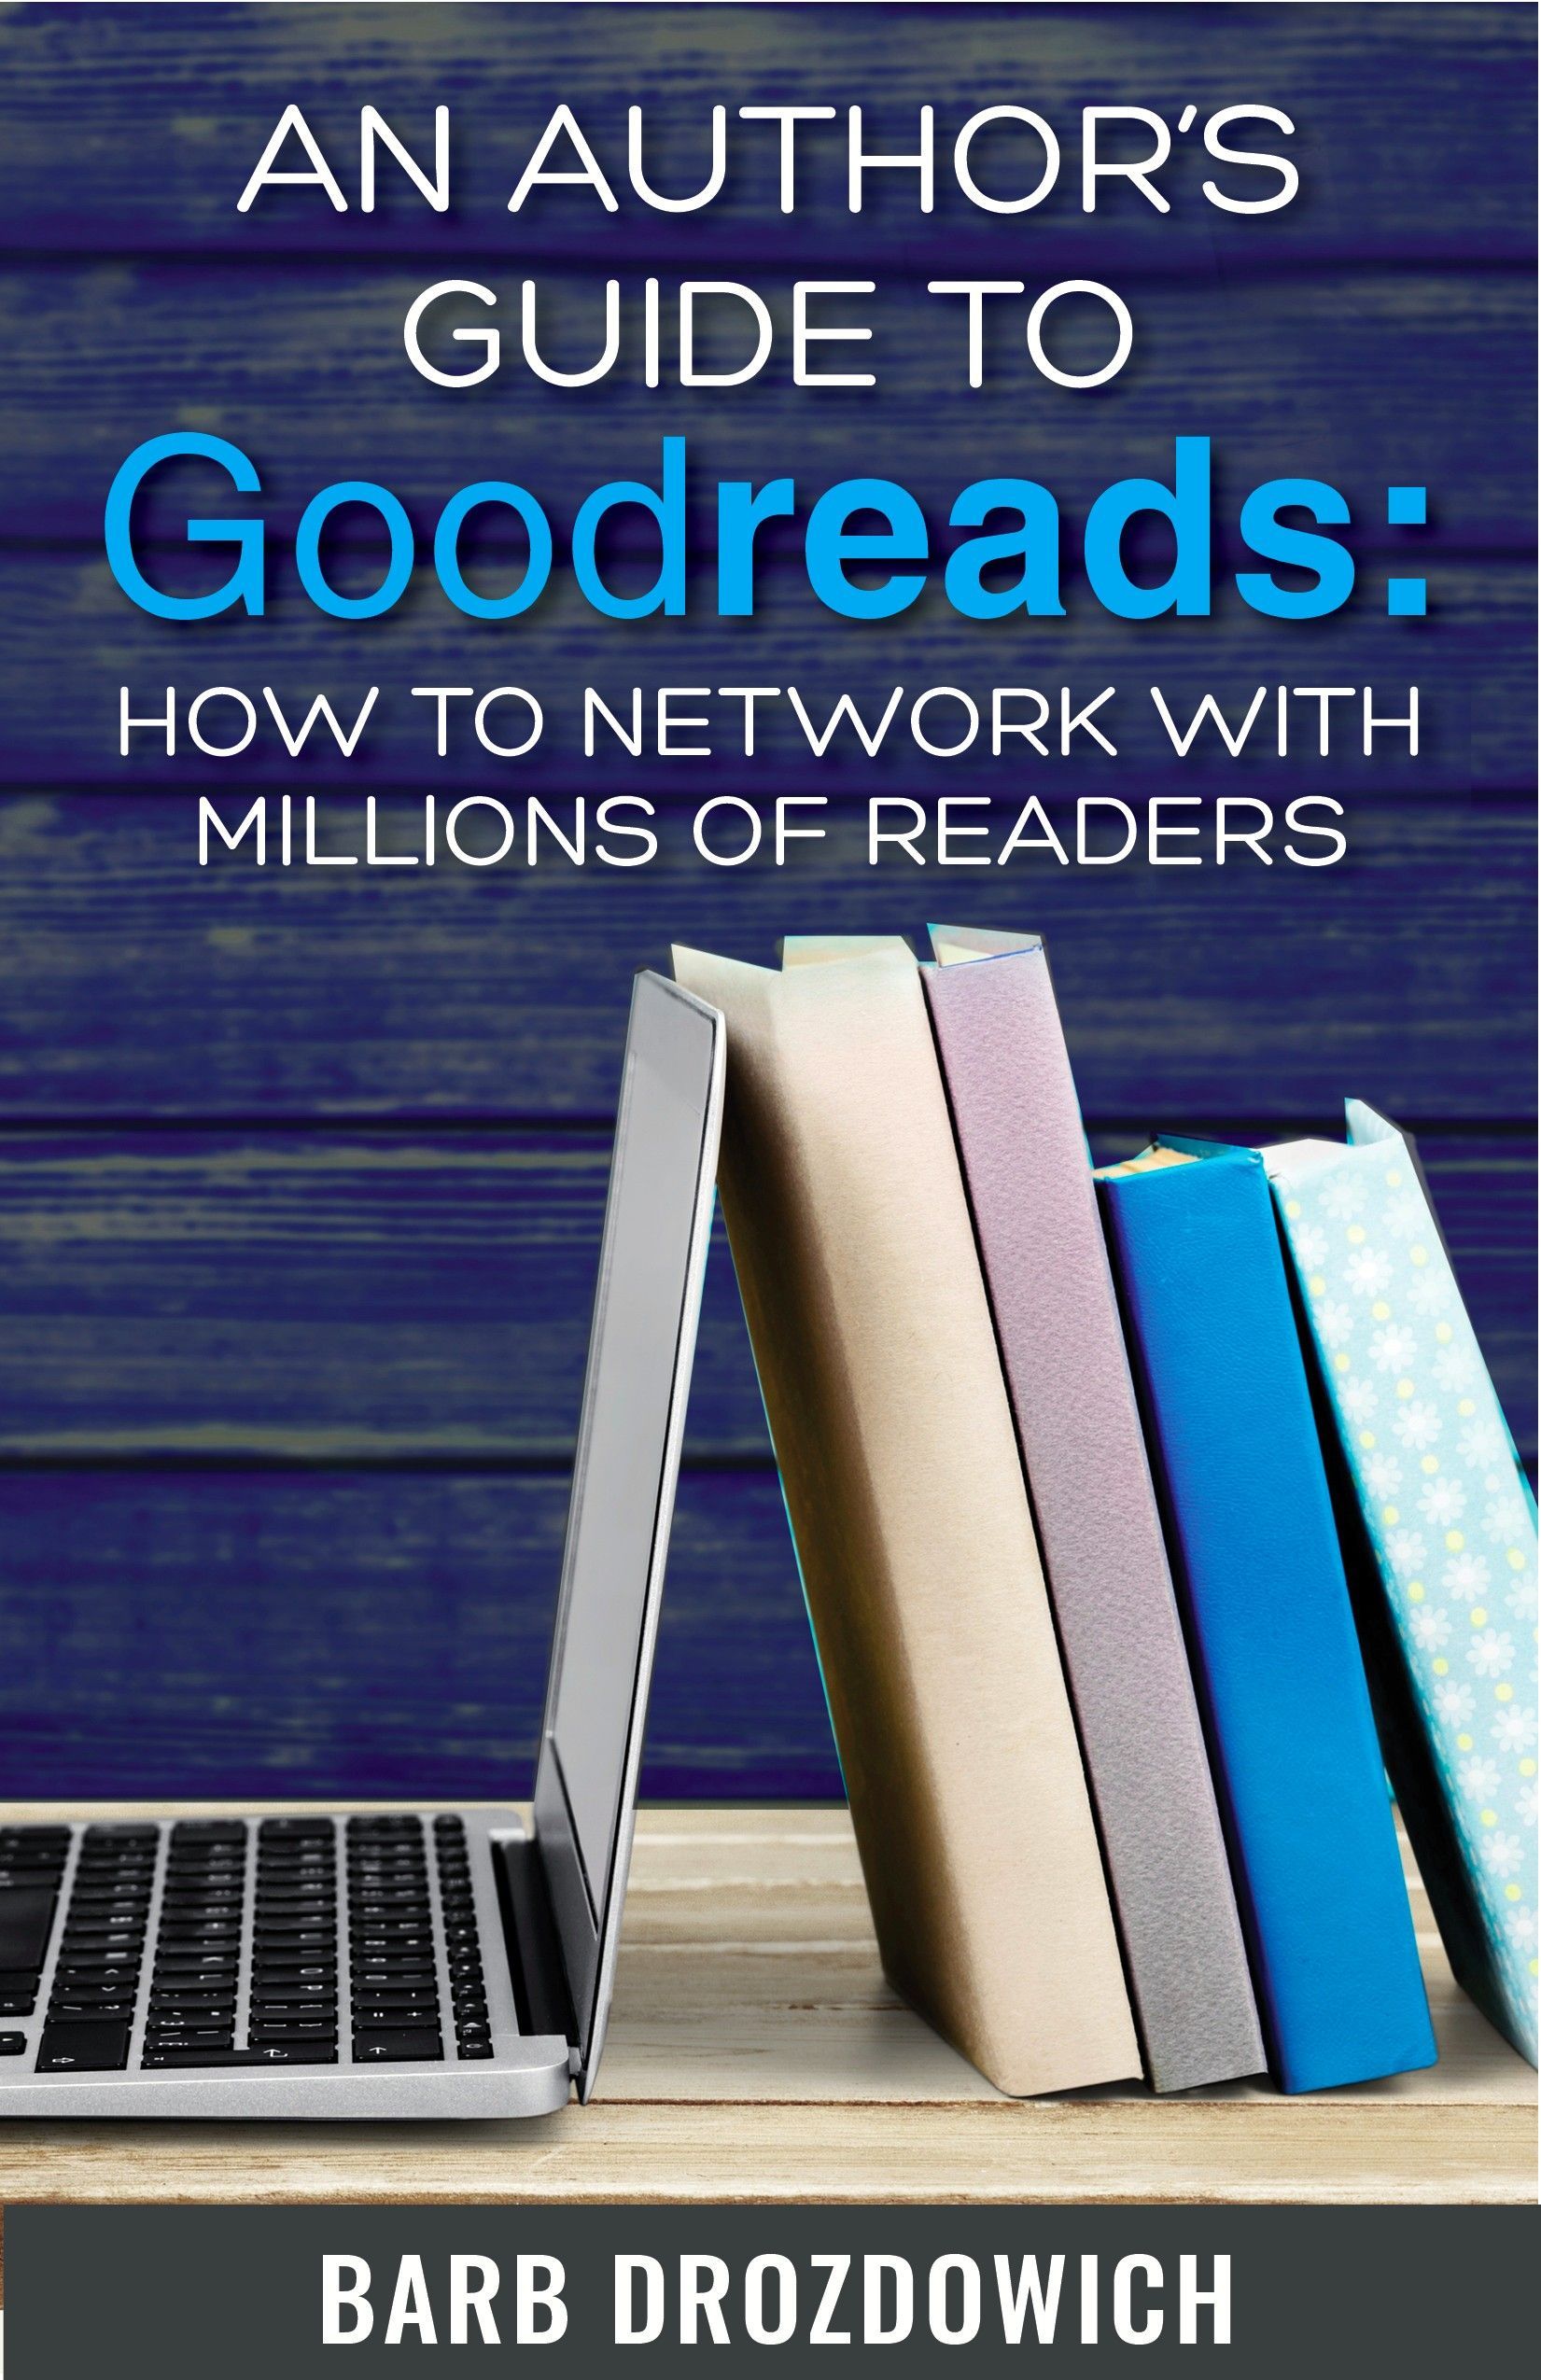 How to Network with millions of readers Book marketing, Promote book